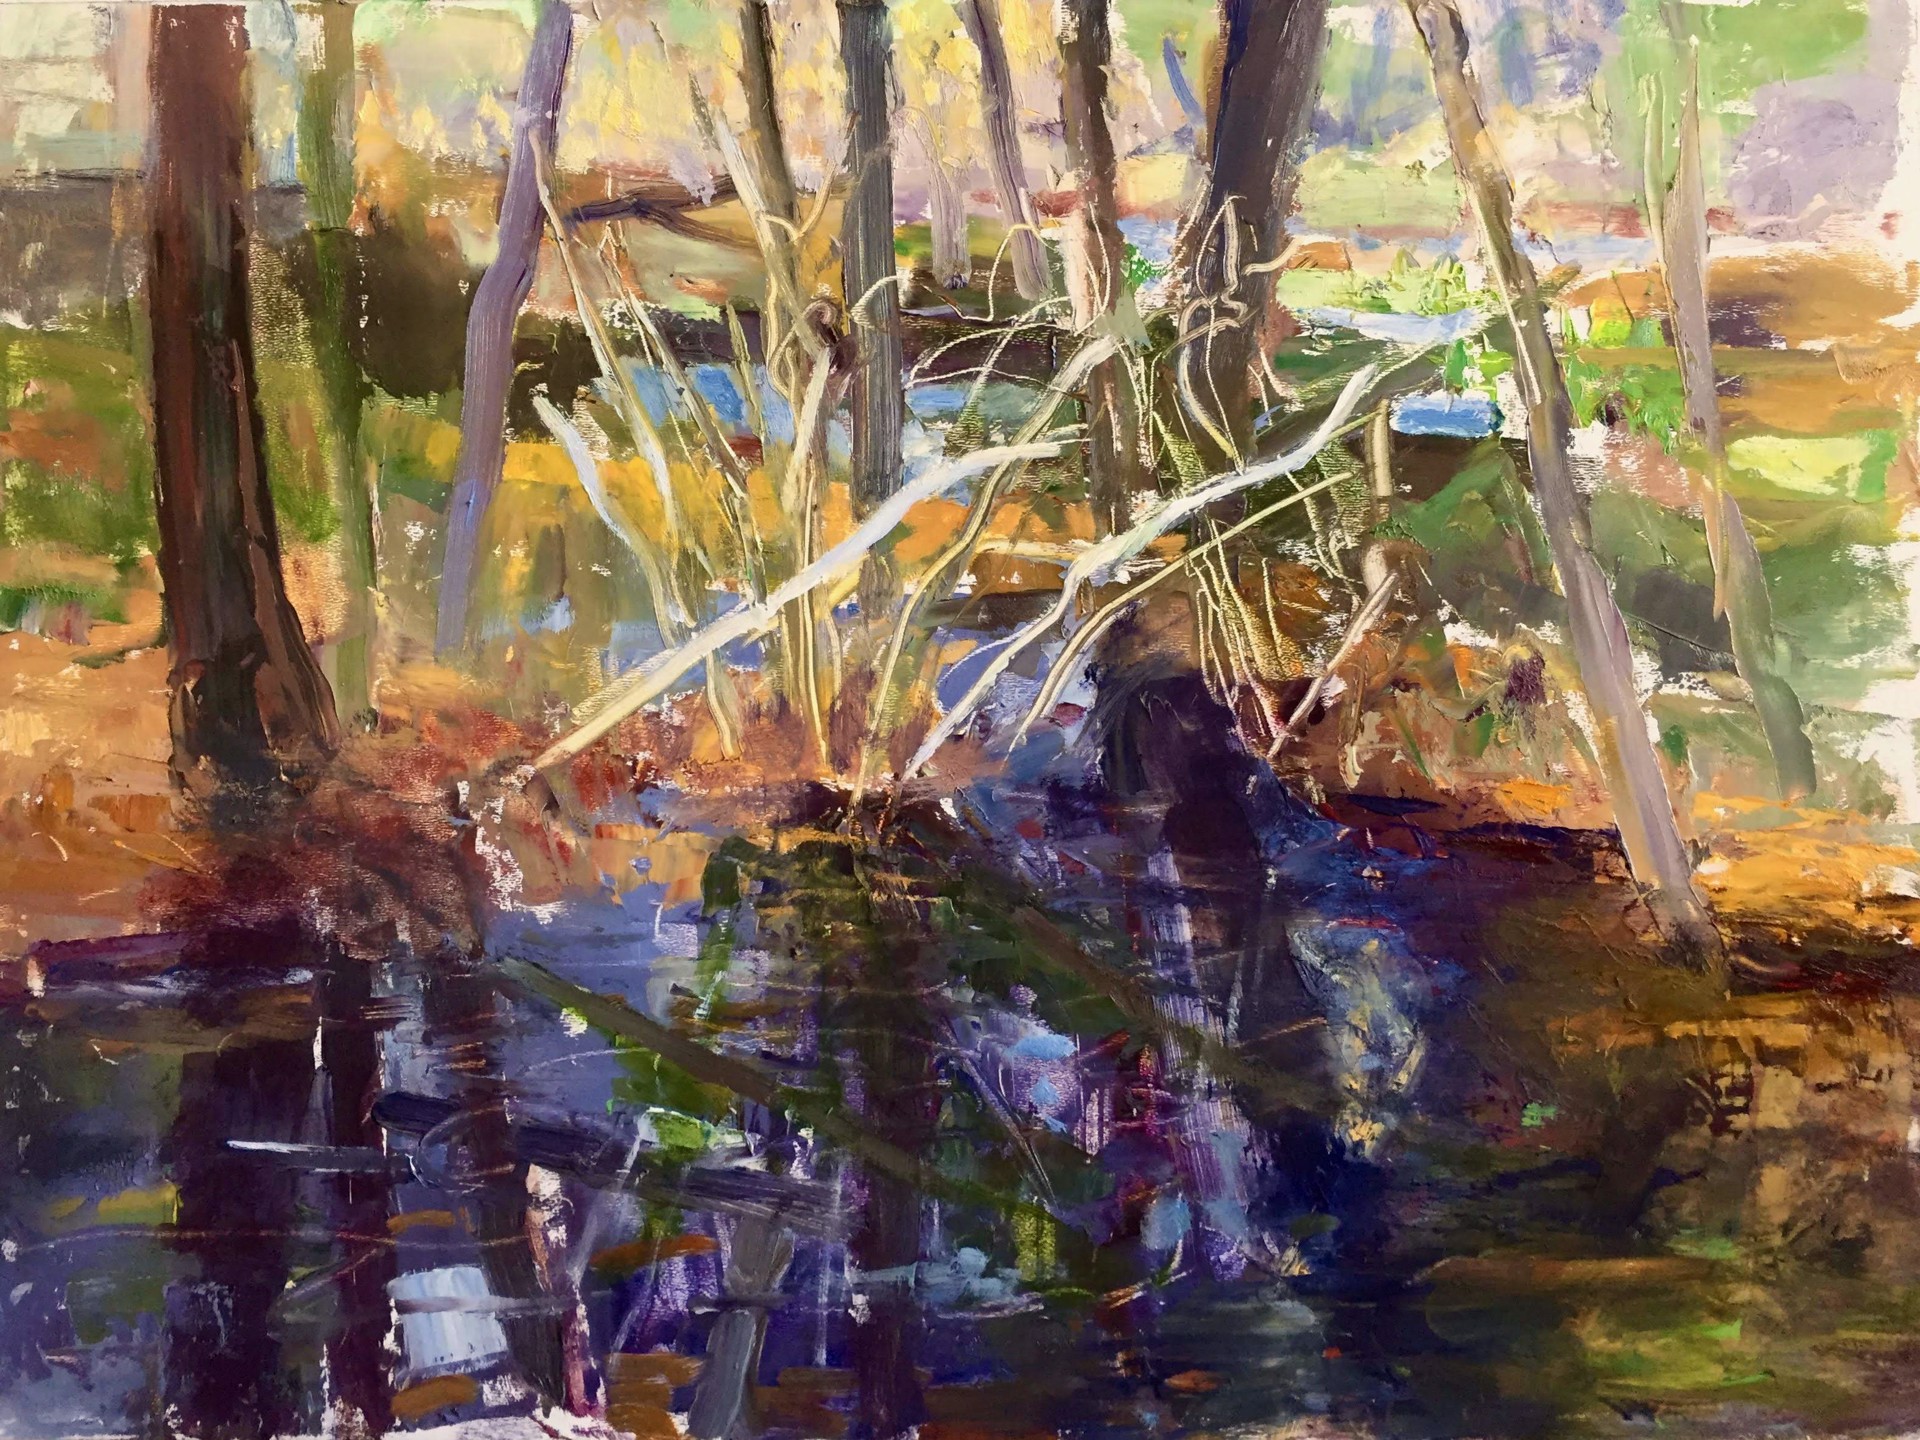 Bog (Stream) #2 by Donald Beal